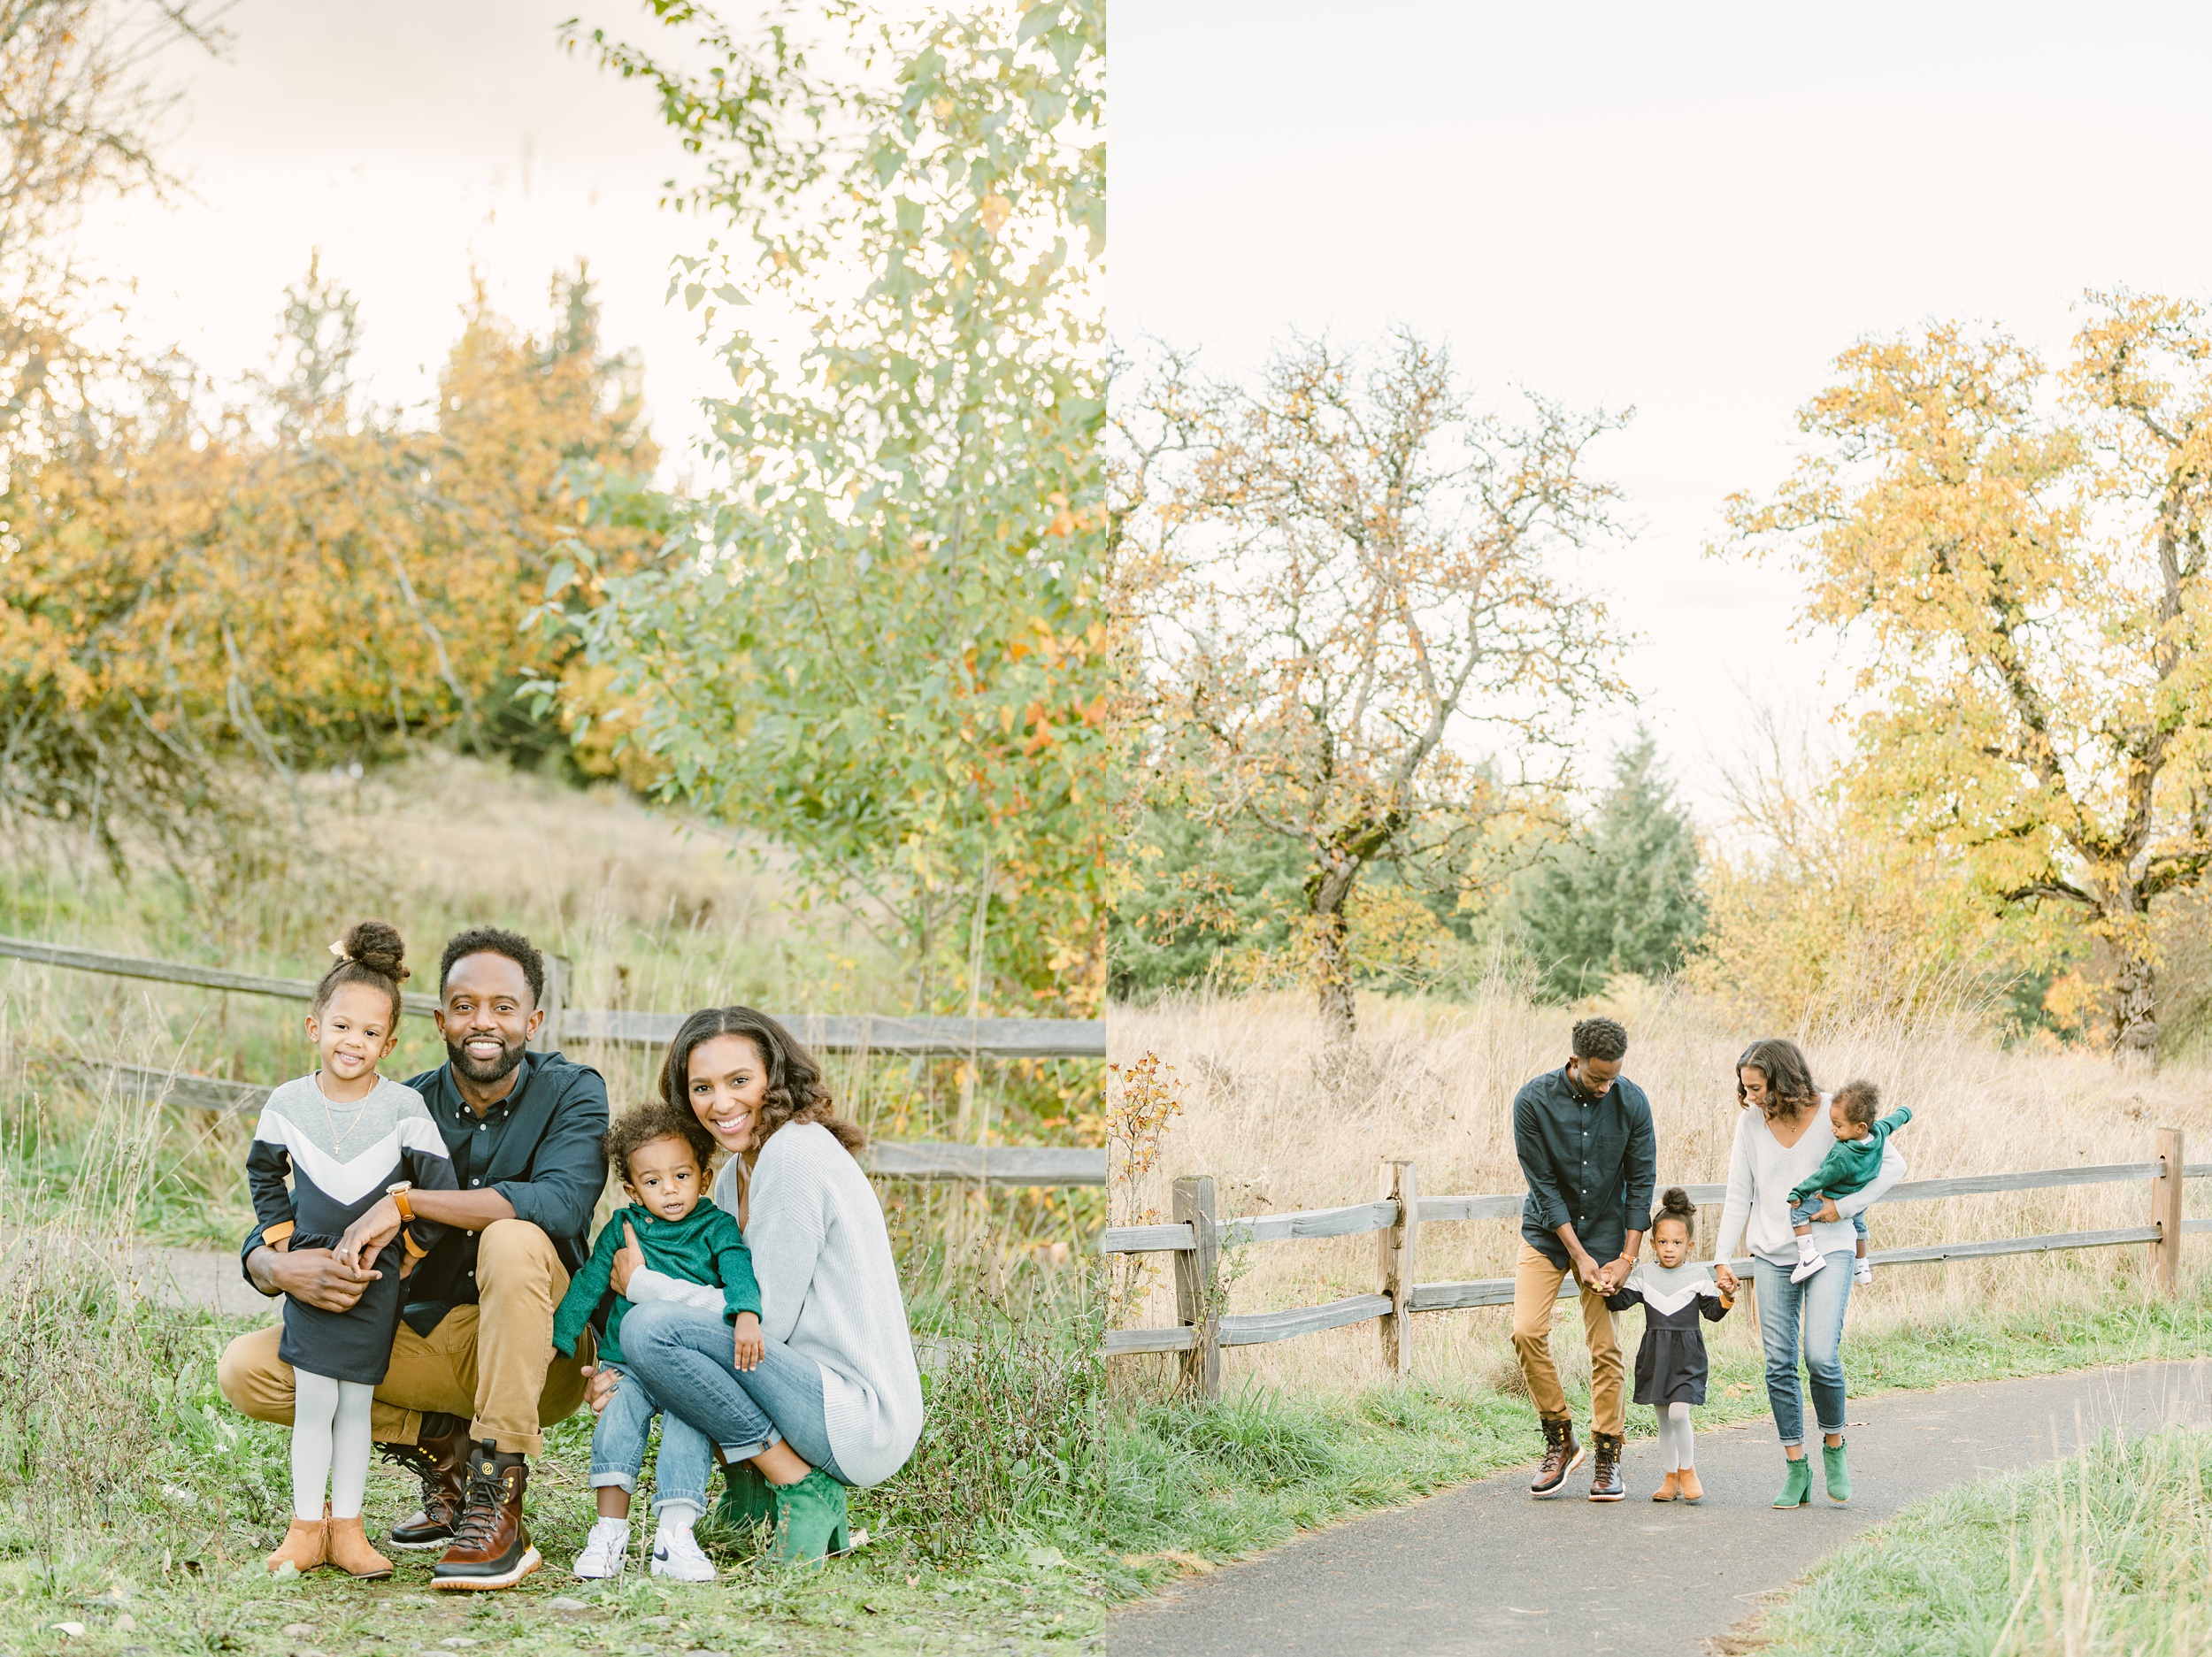 Photography Locations near Portland, Oregon. Fall Photoshoot Locations. Powell Butte Nature Park